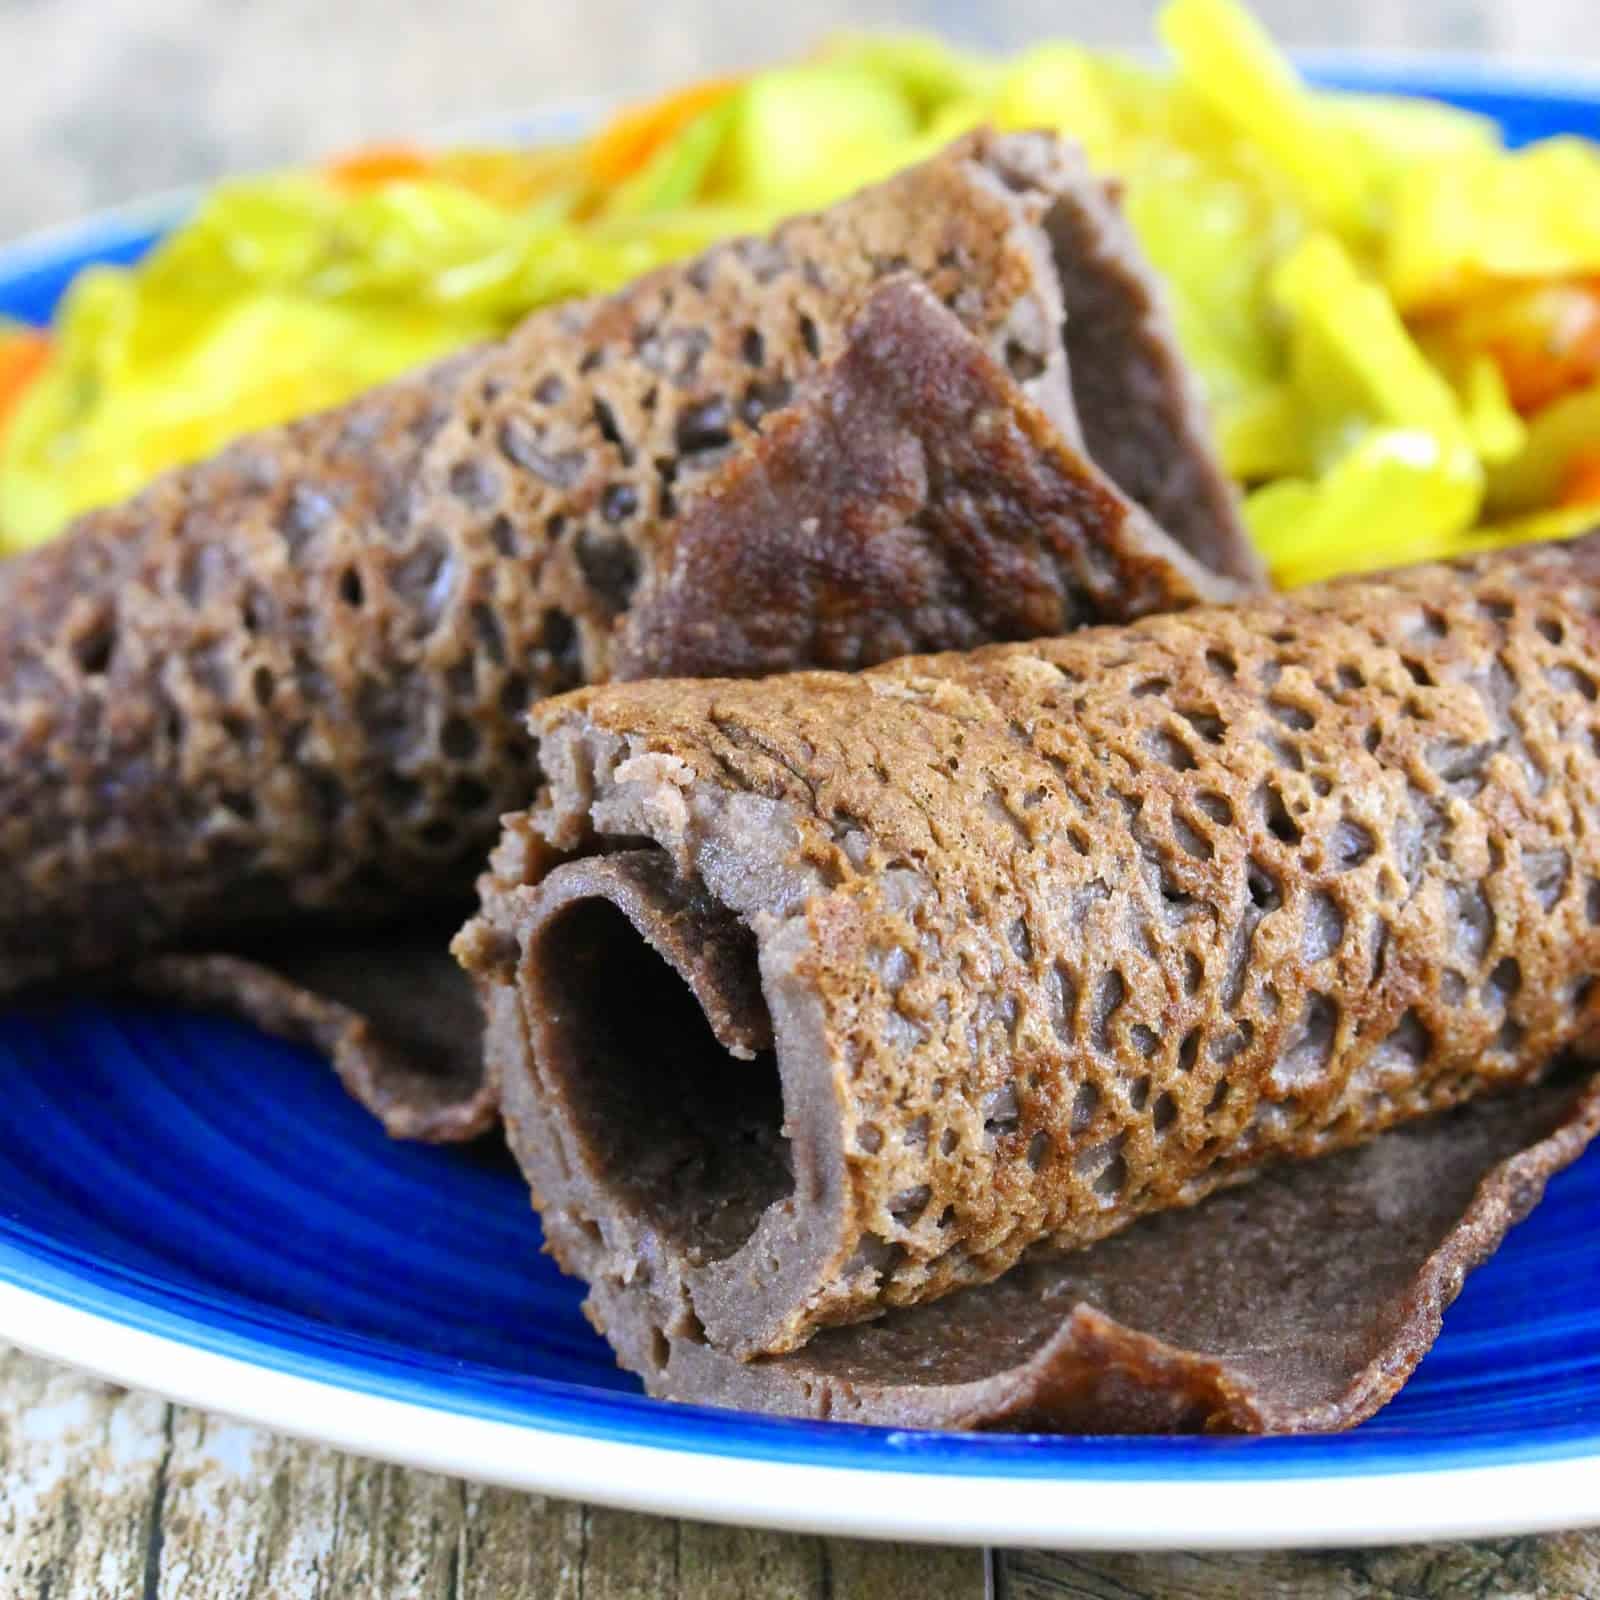 Ethiopian Injera Flat Bread shown up close with a chewy and rich texture